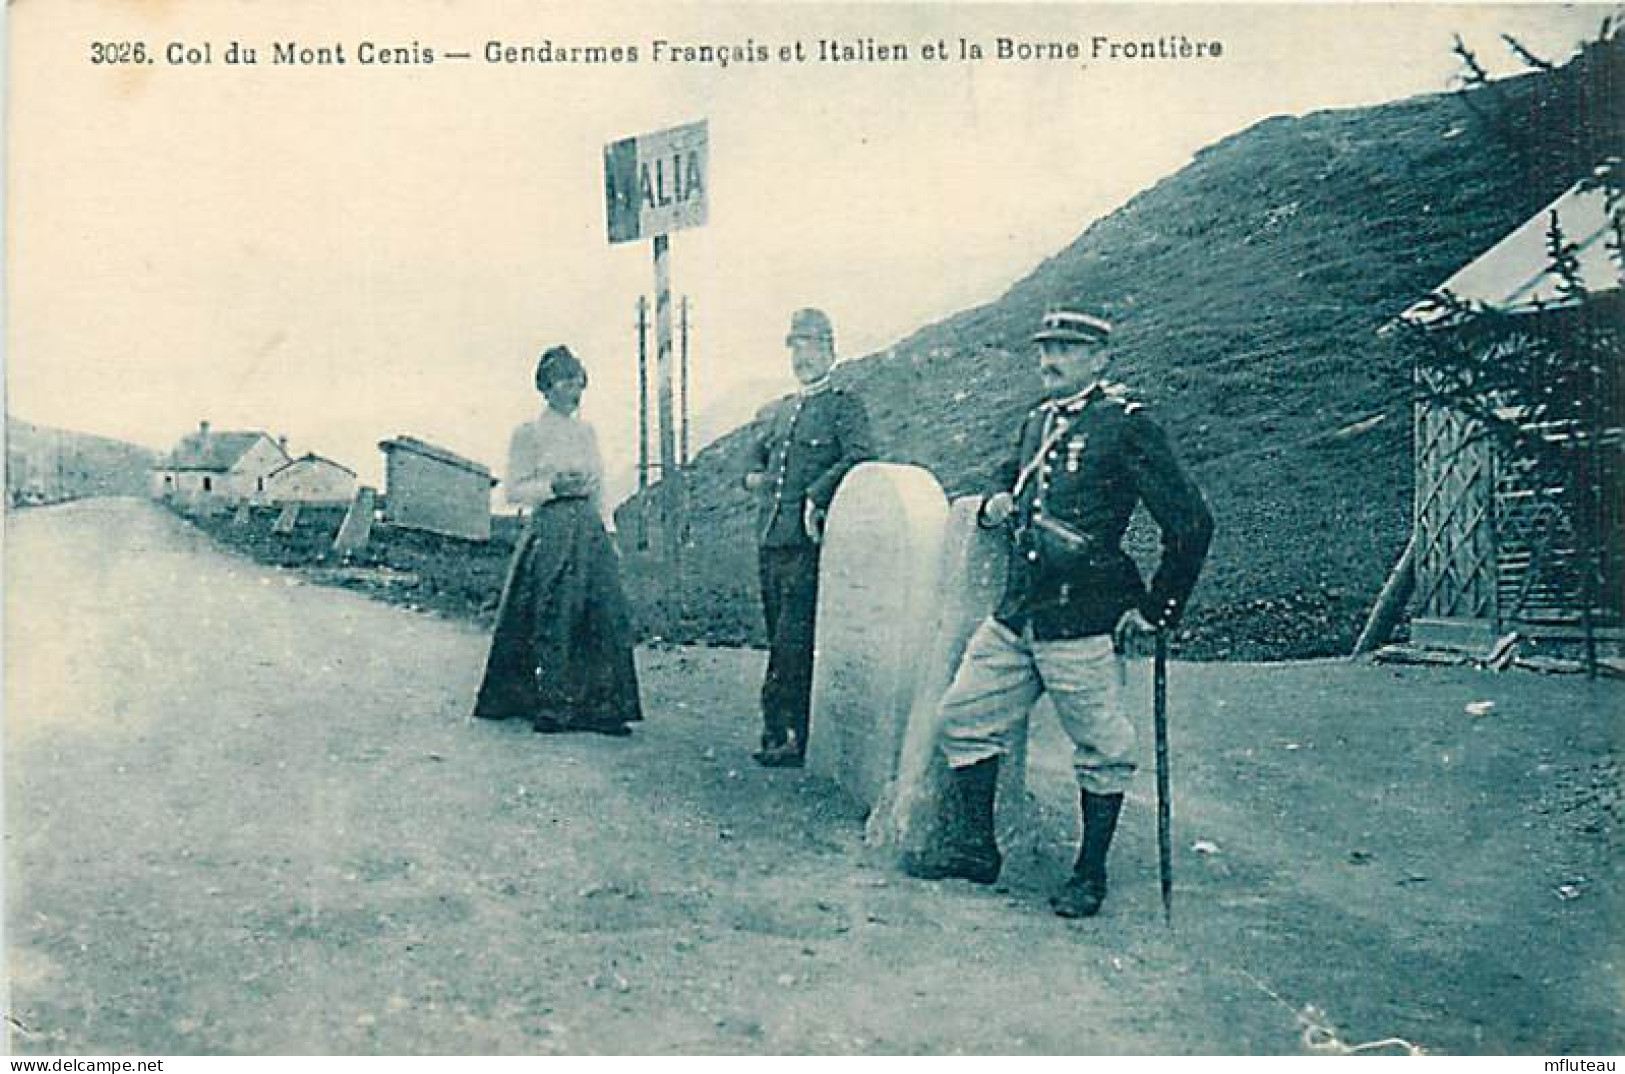 73* MONT CENIS  Fronriere  Gendarmes Francais Et Italien            RL06.1202 - Polizei - Gendarmerie